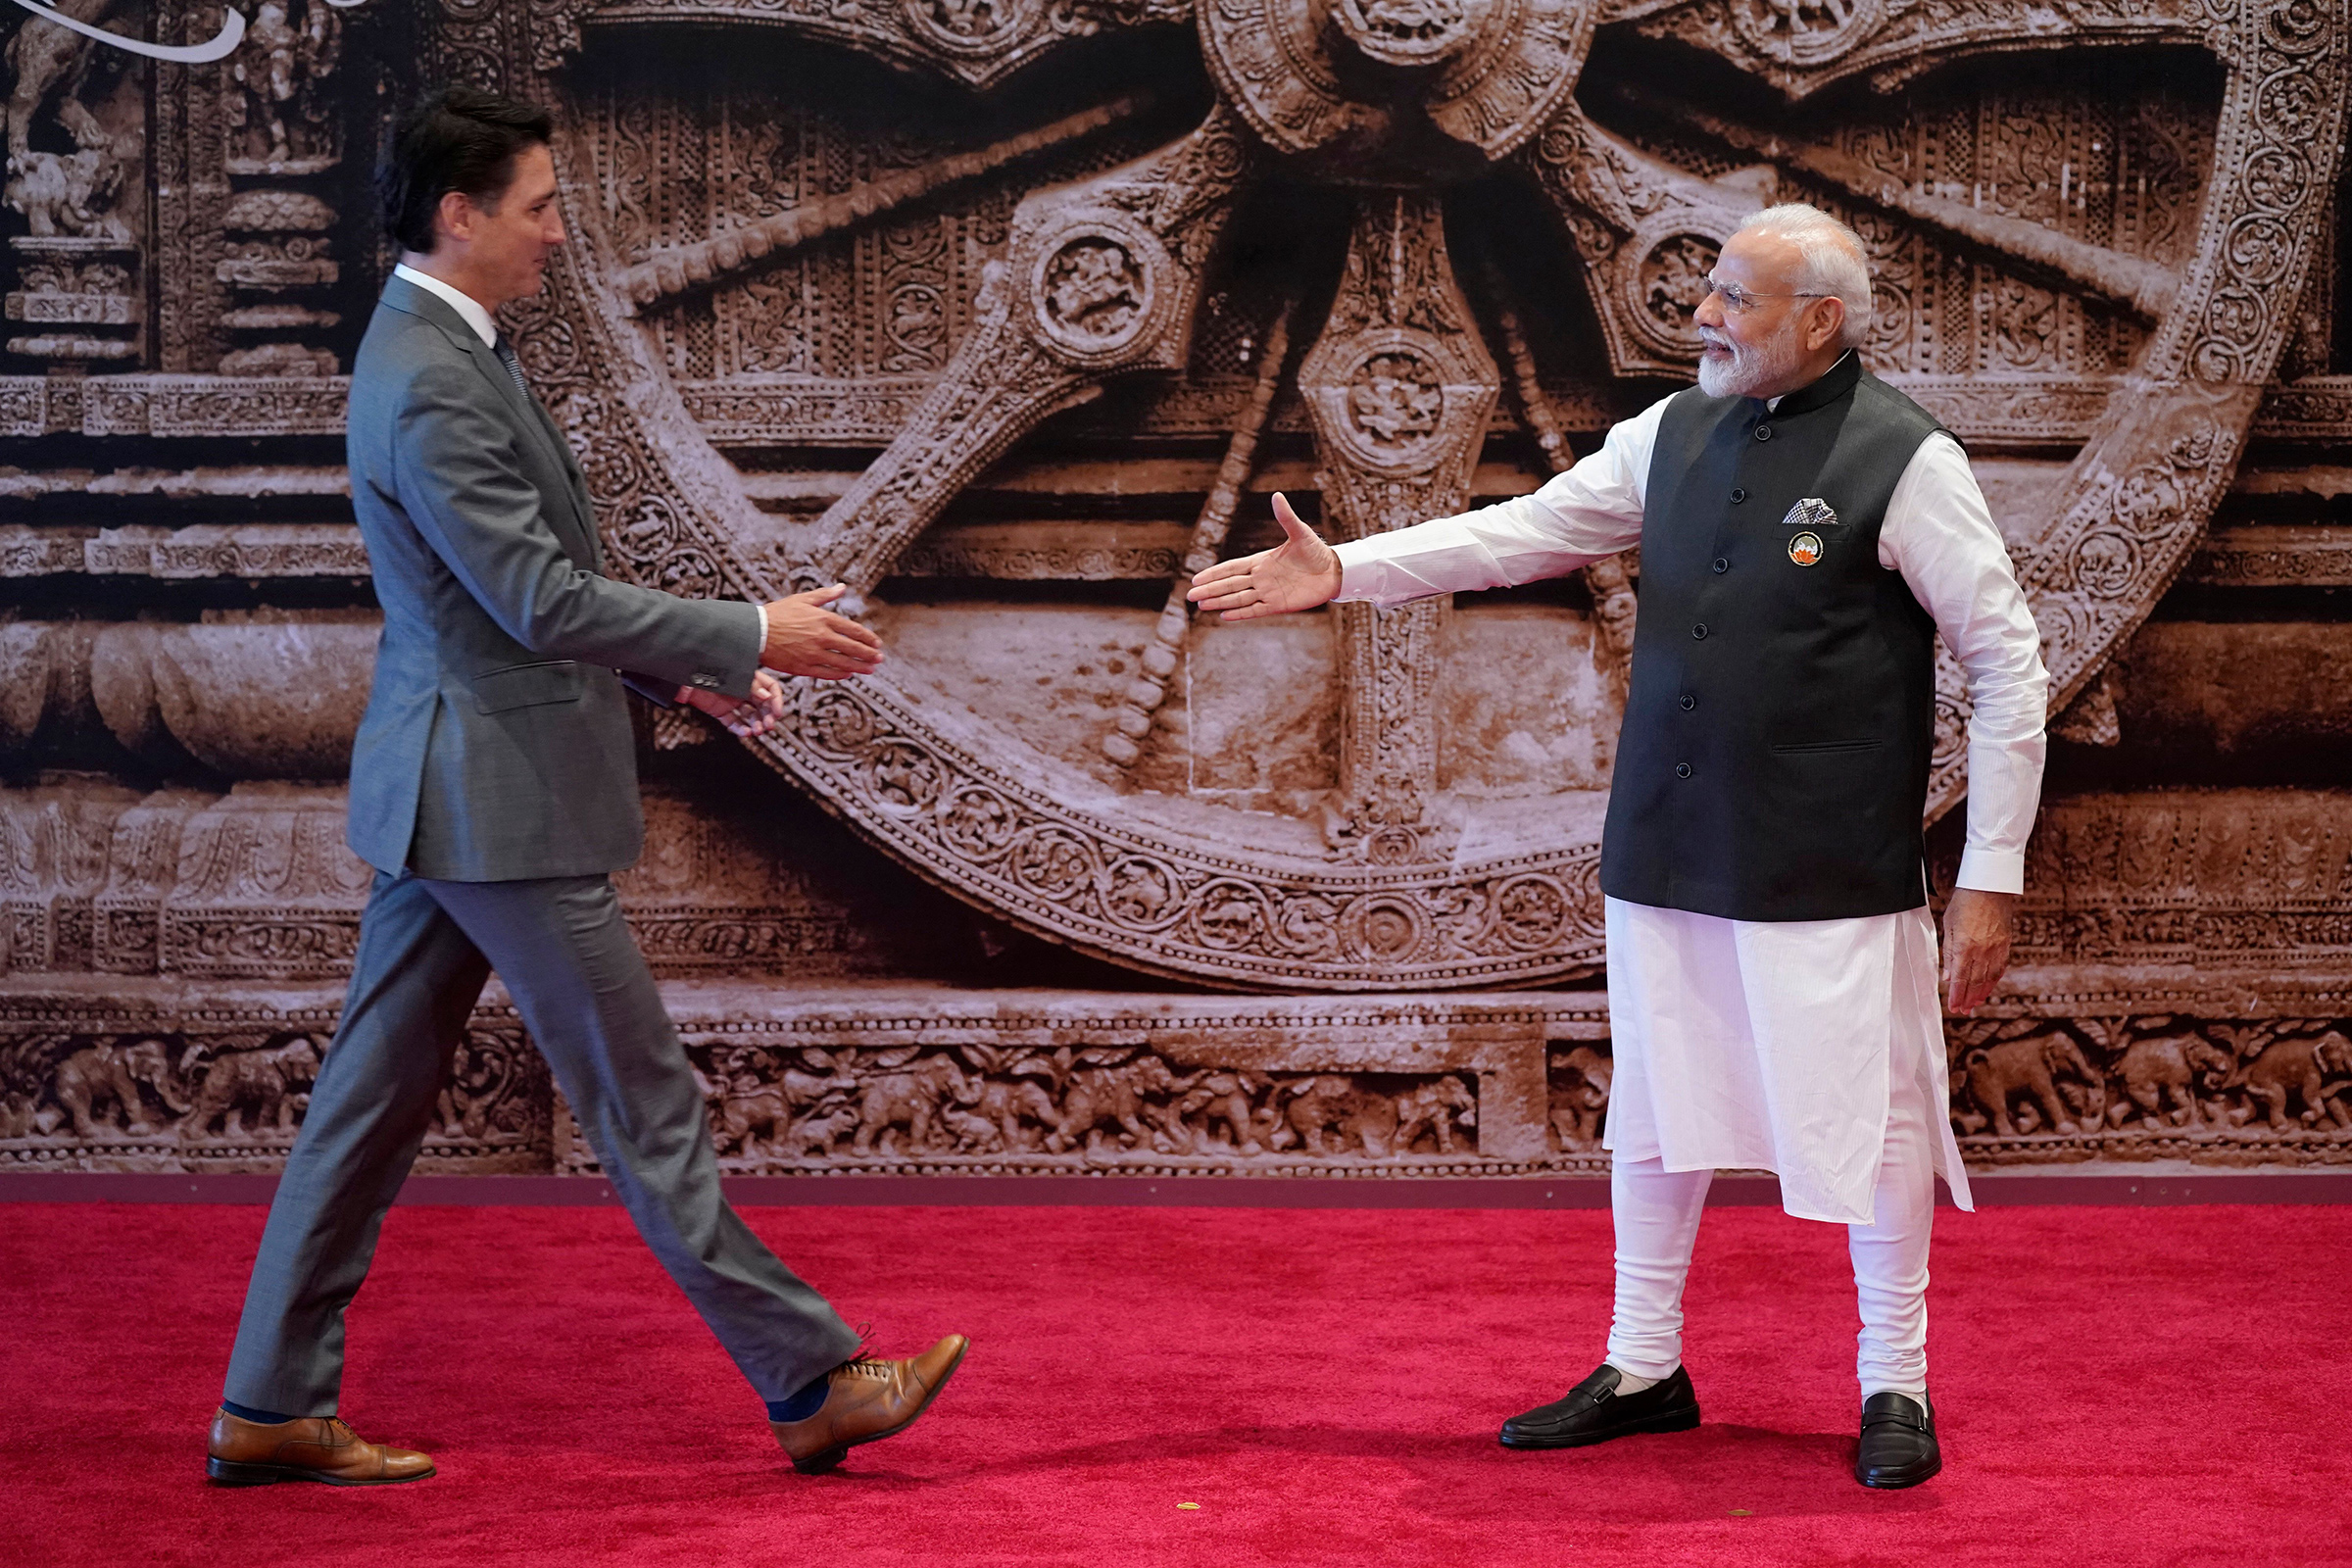 India's Prime Minister Narendra Modi greets Canada's Prime Minister Justin Trudeau ahead of the G20 Leaders' Summit in New Delhi on Sept. 9. (Evan Vucci—POOL/AFP/Getty Images)